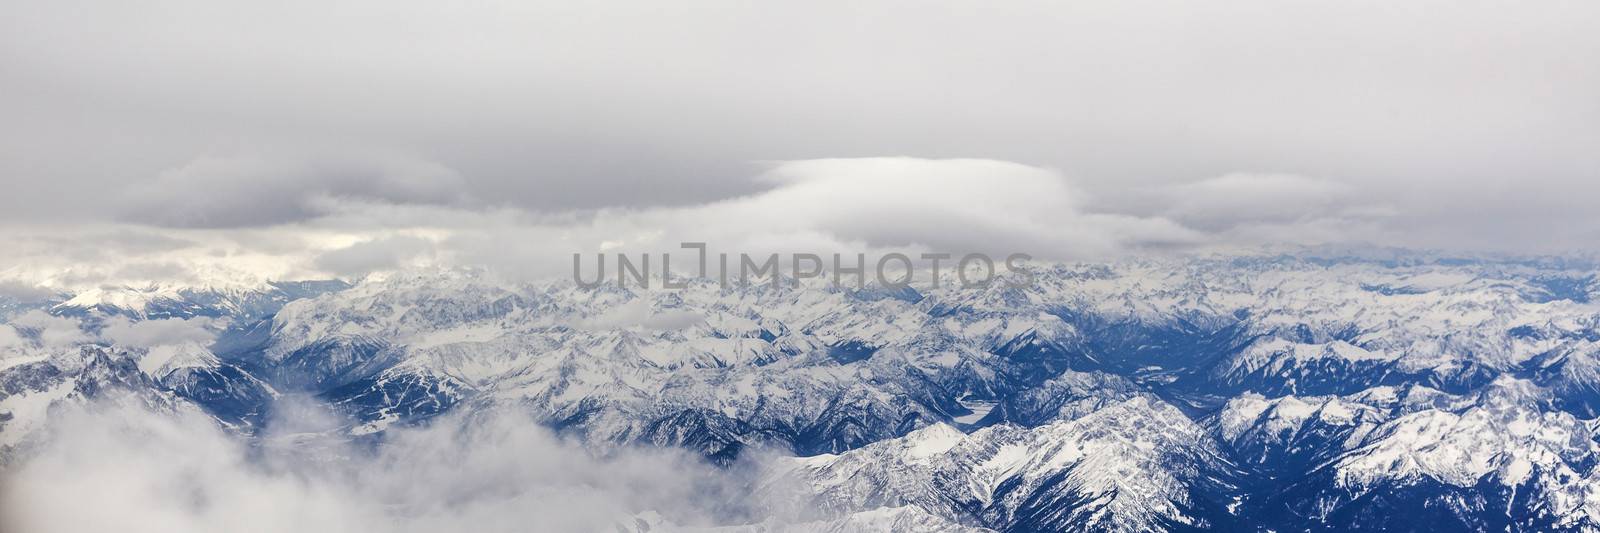 The Alps by PhotoWorks